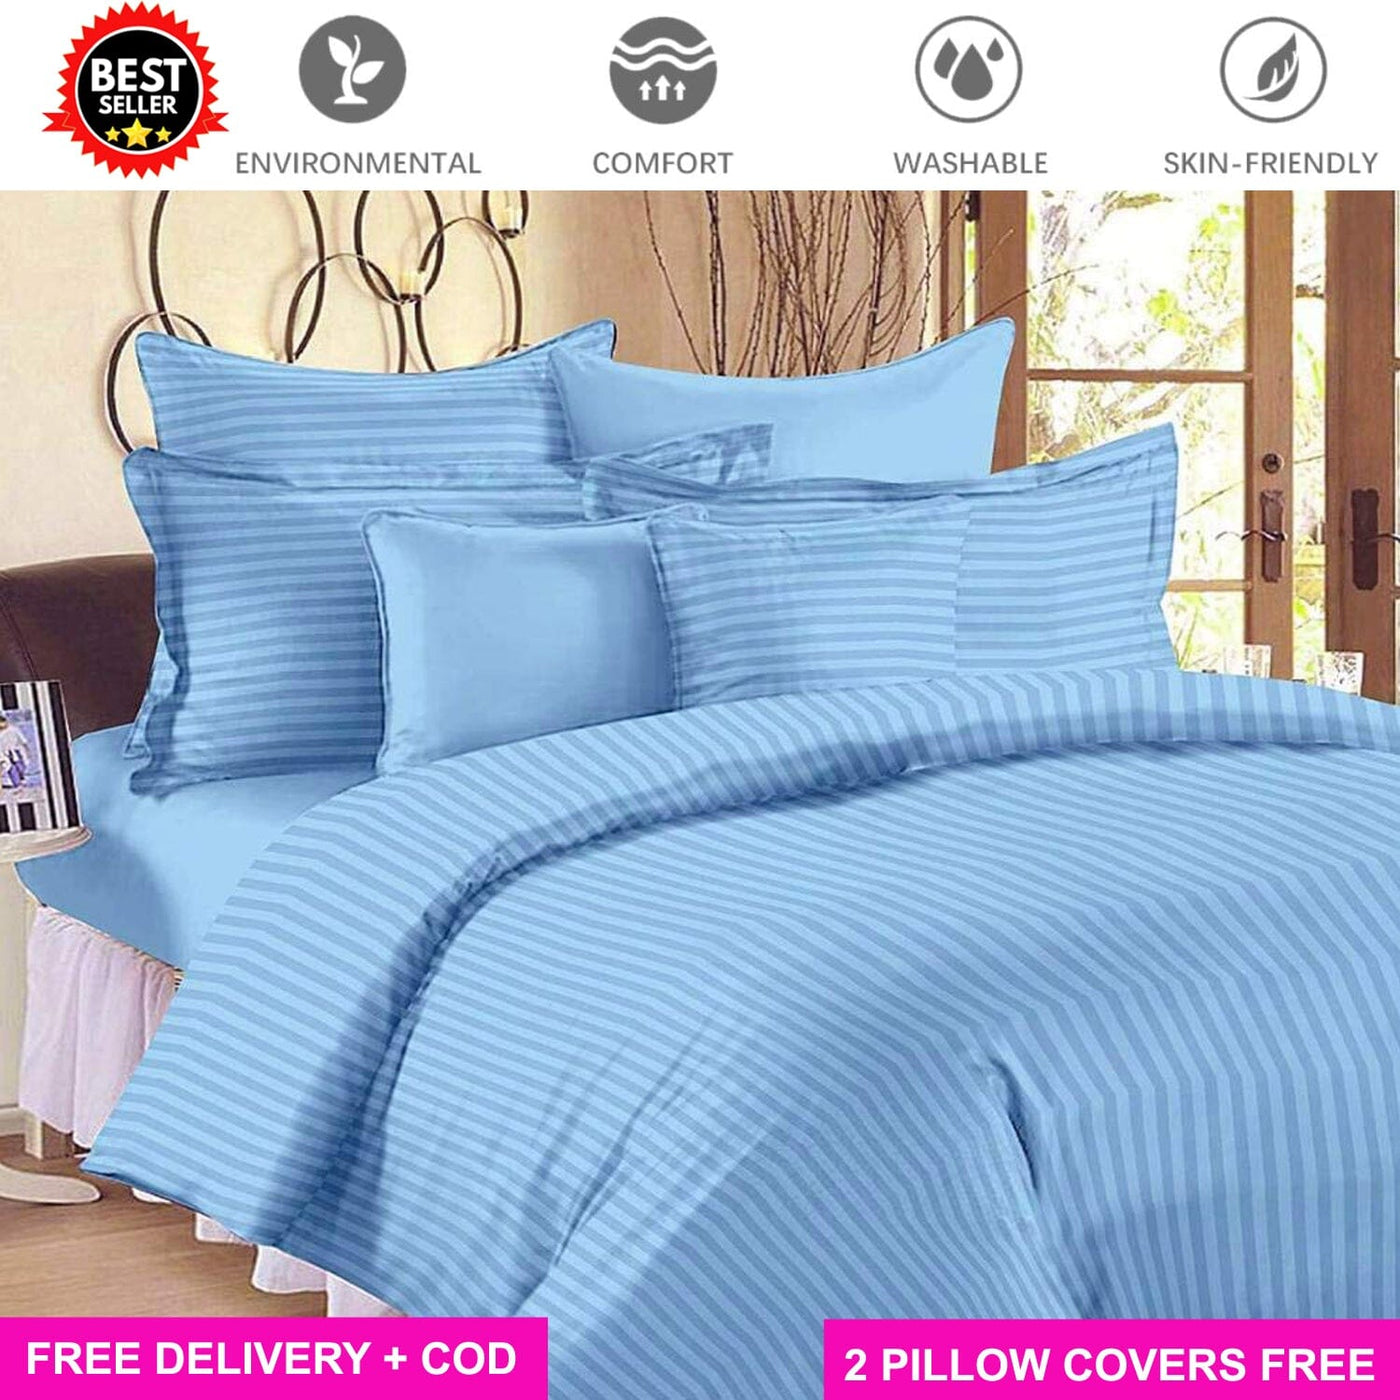 Satin Sky Blue Full Elastic Fitted Bedsheet with 2 Pillow Covers Bed Sheets Great Happy IN KING SIZE - ₹1299 